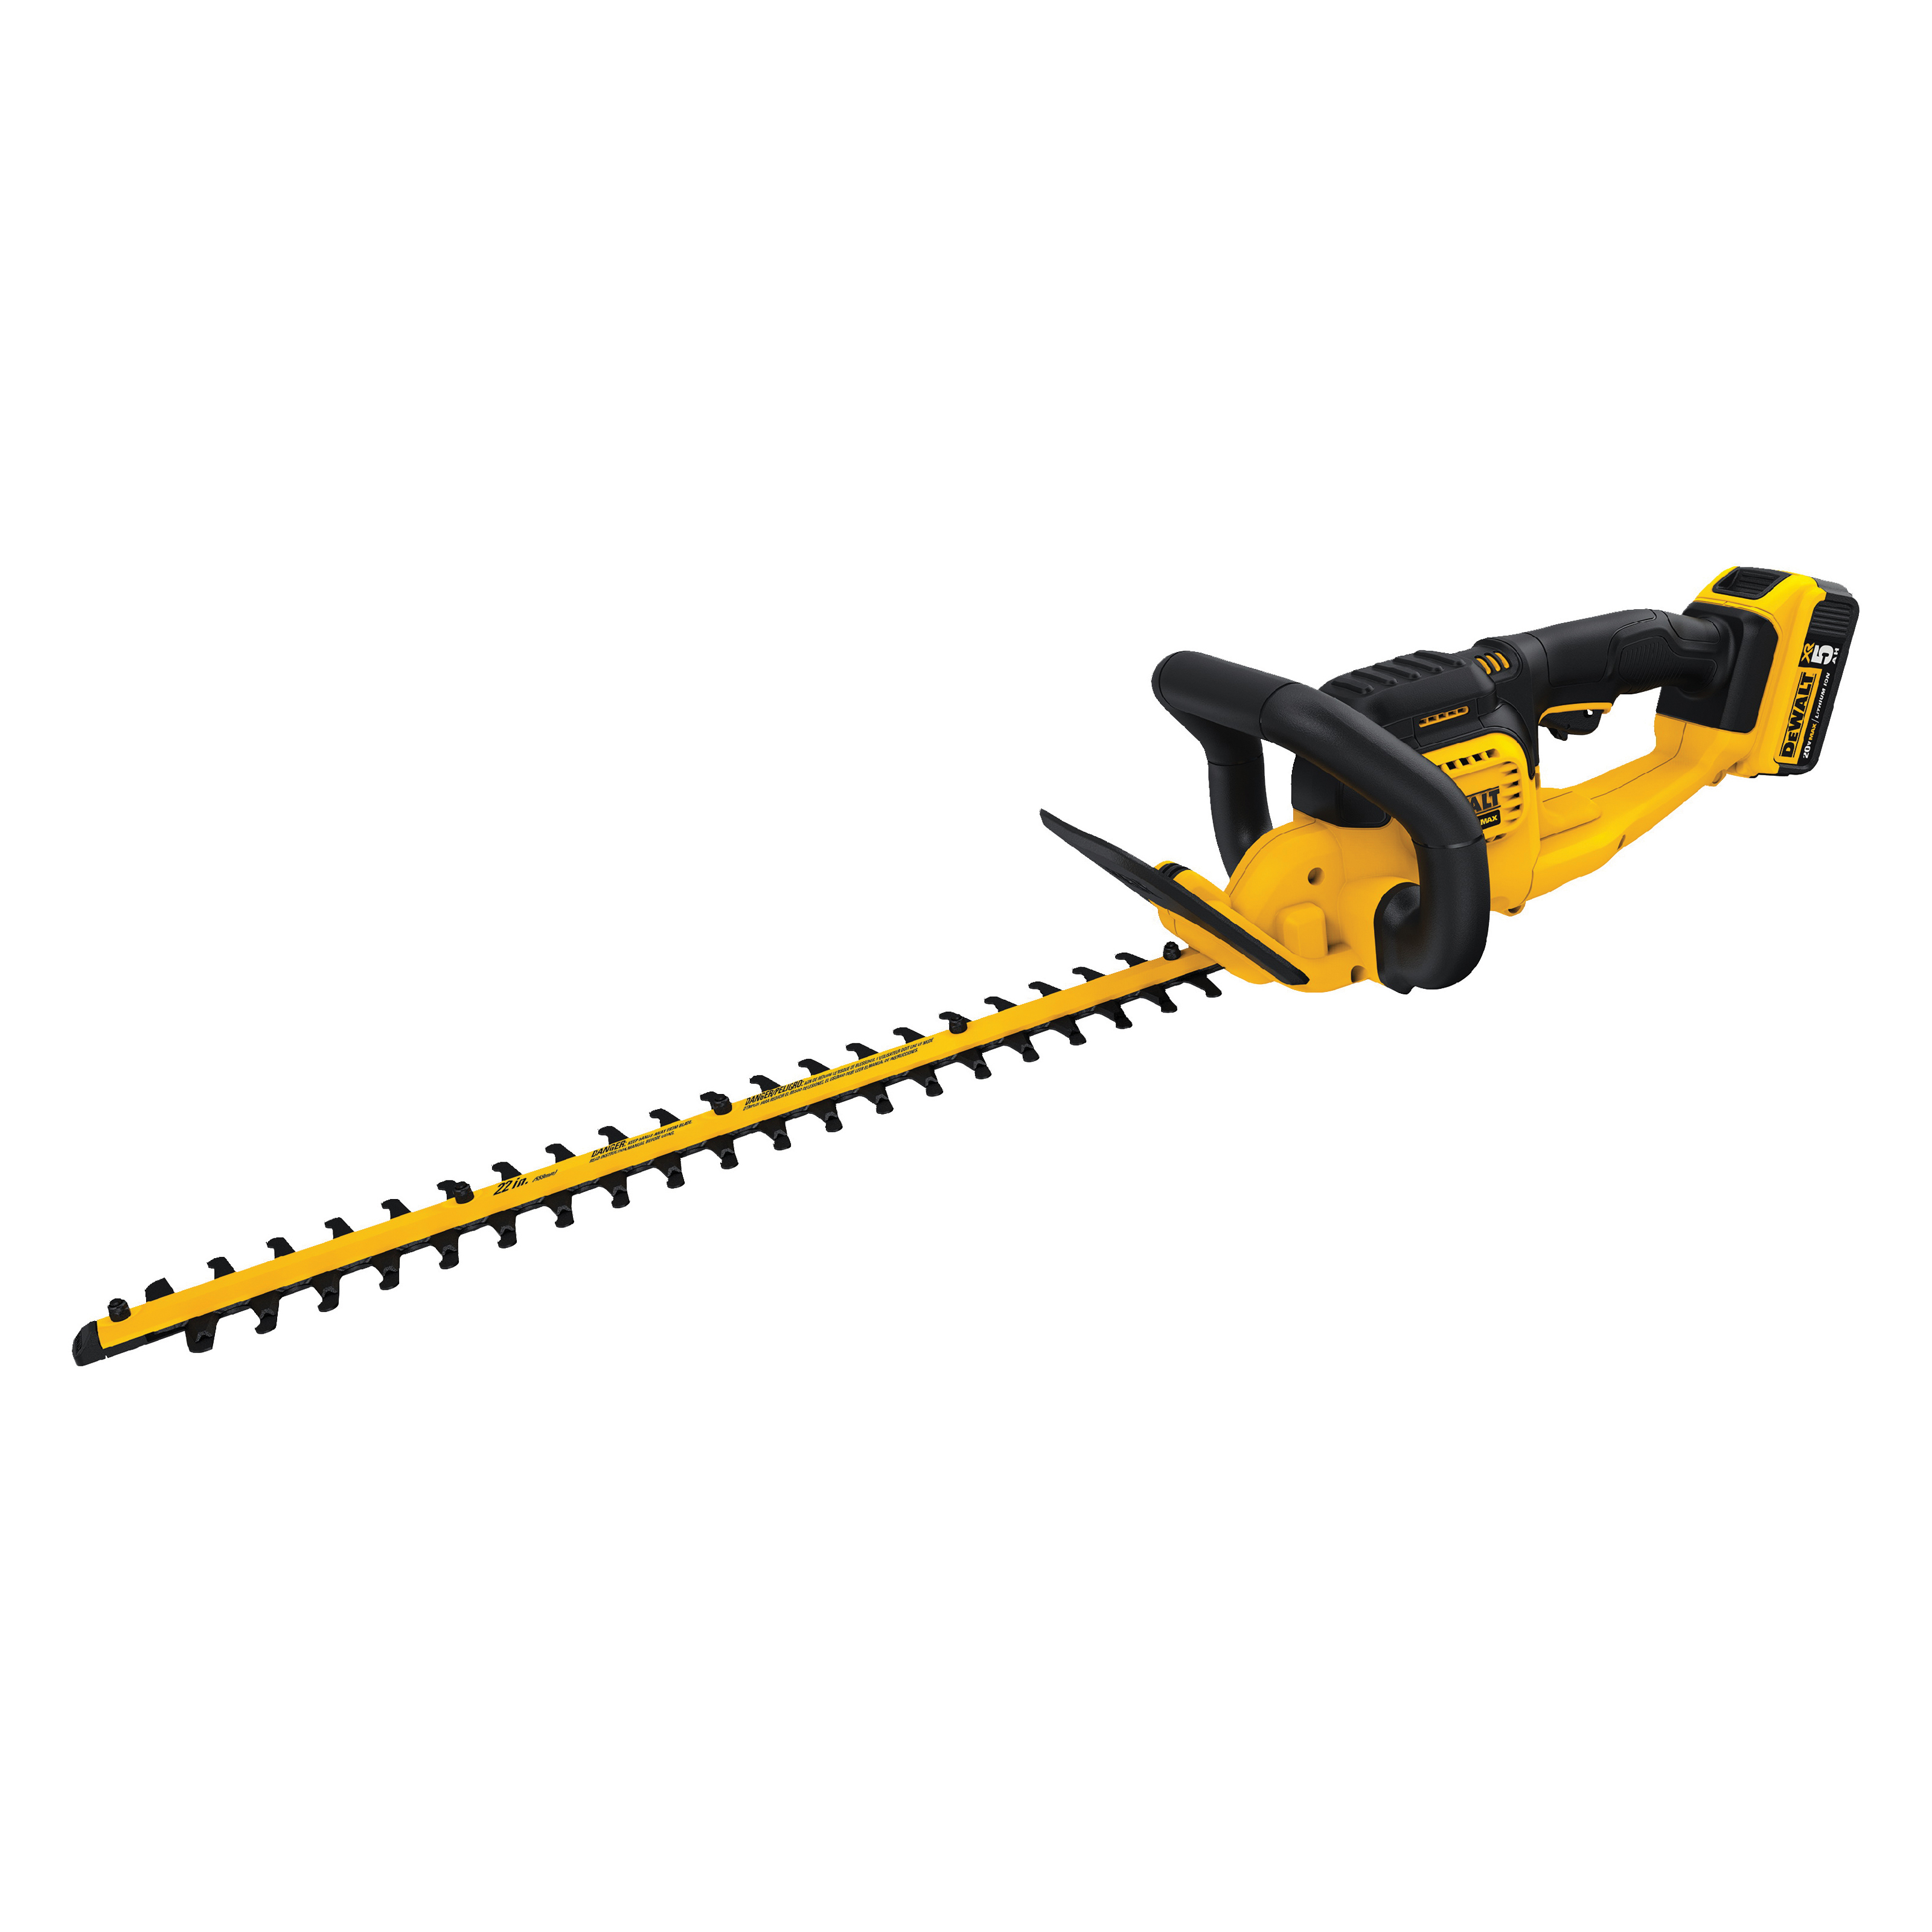 DCHT820P1 Hedge Trimmer, 20 V, 3/4 in Cutting Capacity, 22 in L Blade